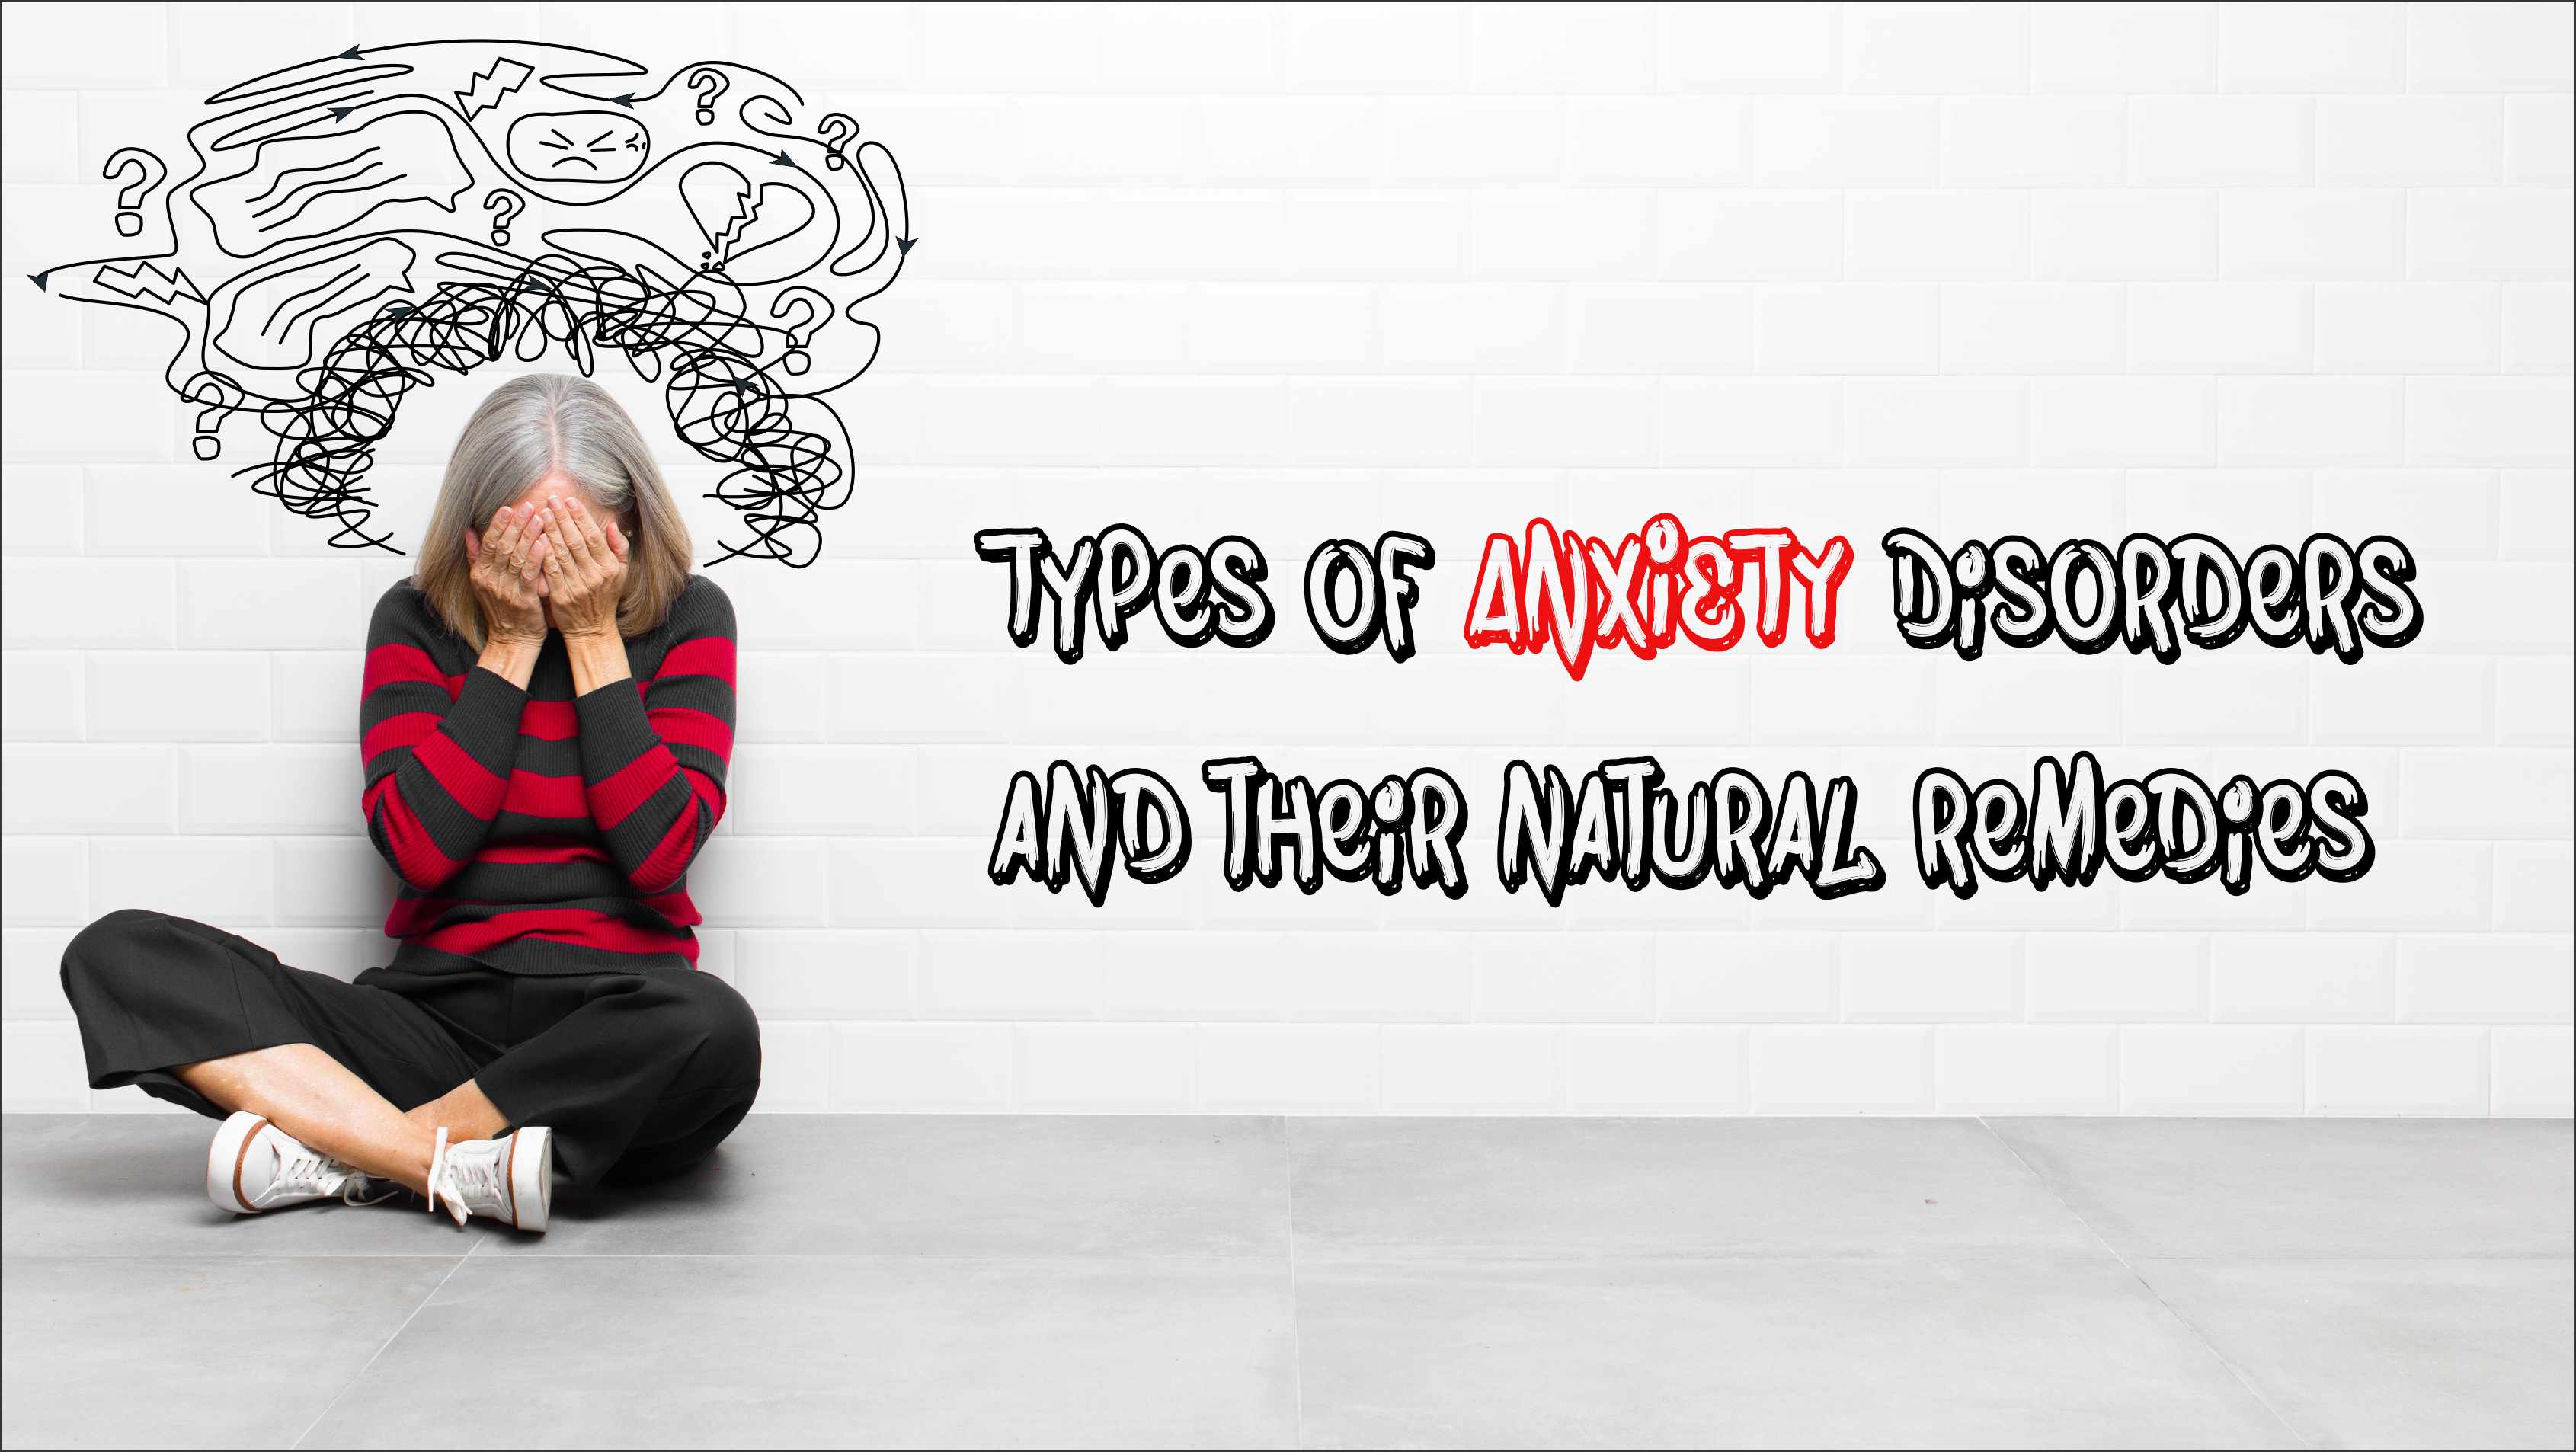 Types Of Anxiety Disorders and their natural remedies